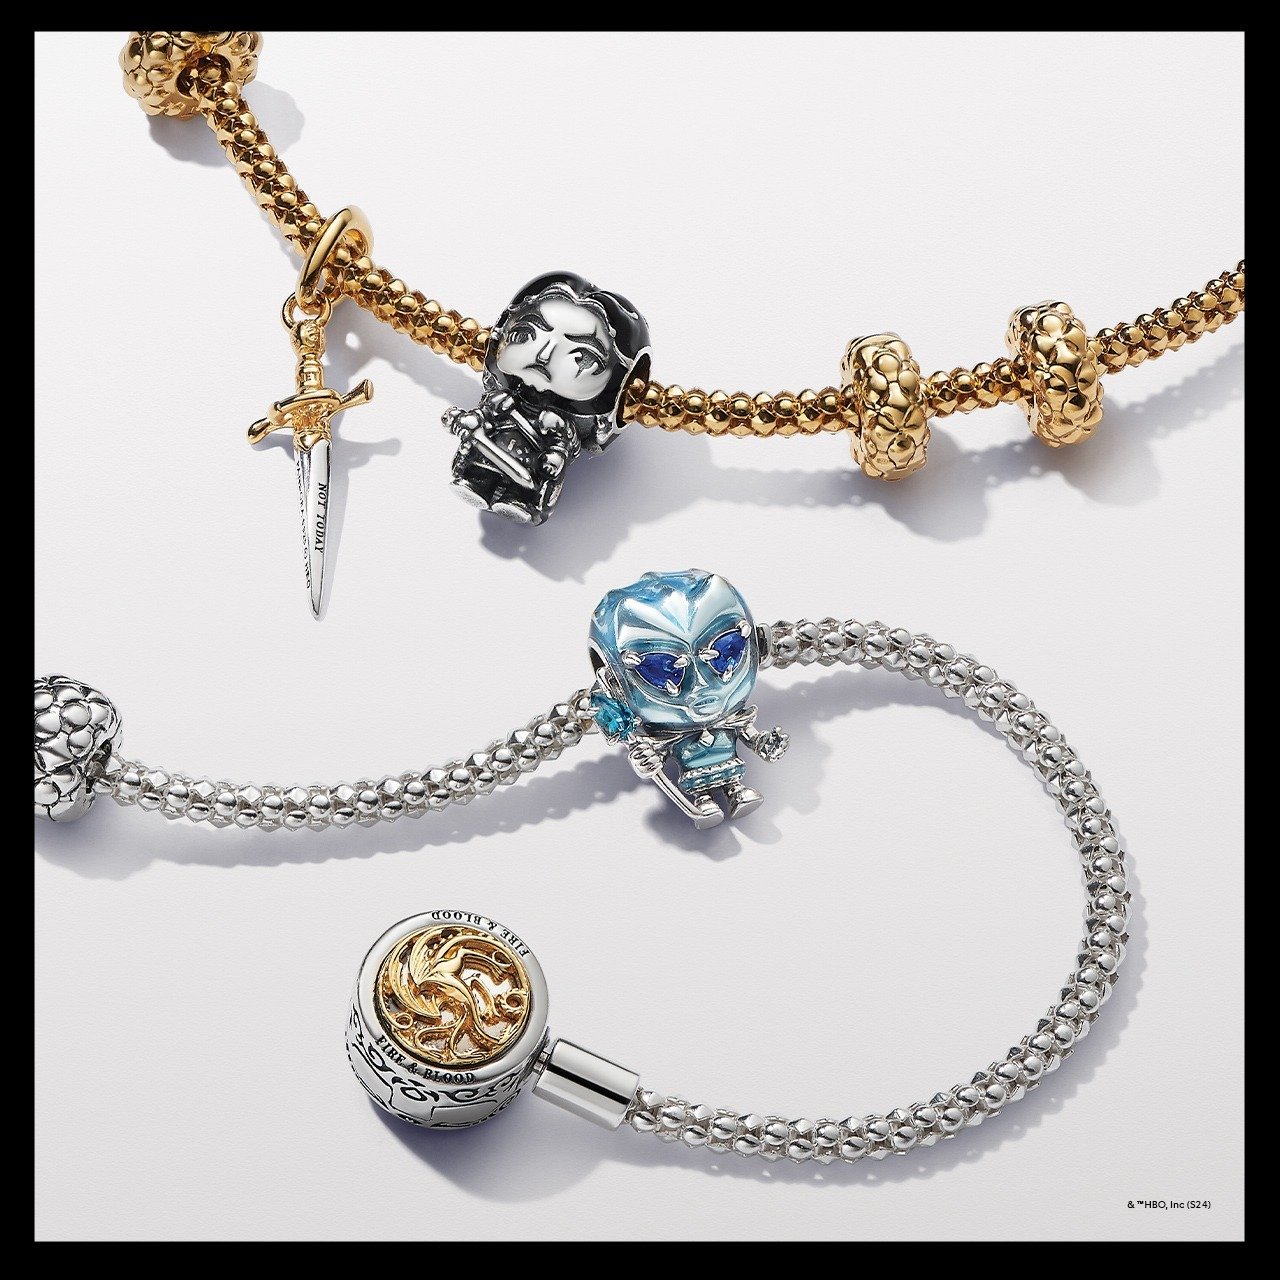 Step into the realm of legends with the new Game of Thrones x @theofficialpandora collection! 🐉✨

Unleash your inner dragon or embrace the strength of the Stark family with the latest styles inspired by the iconic series. 🏰🔥

Explore the collectio